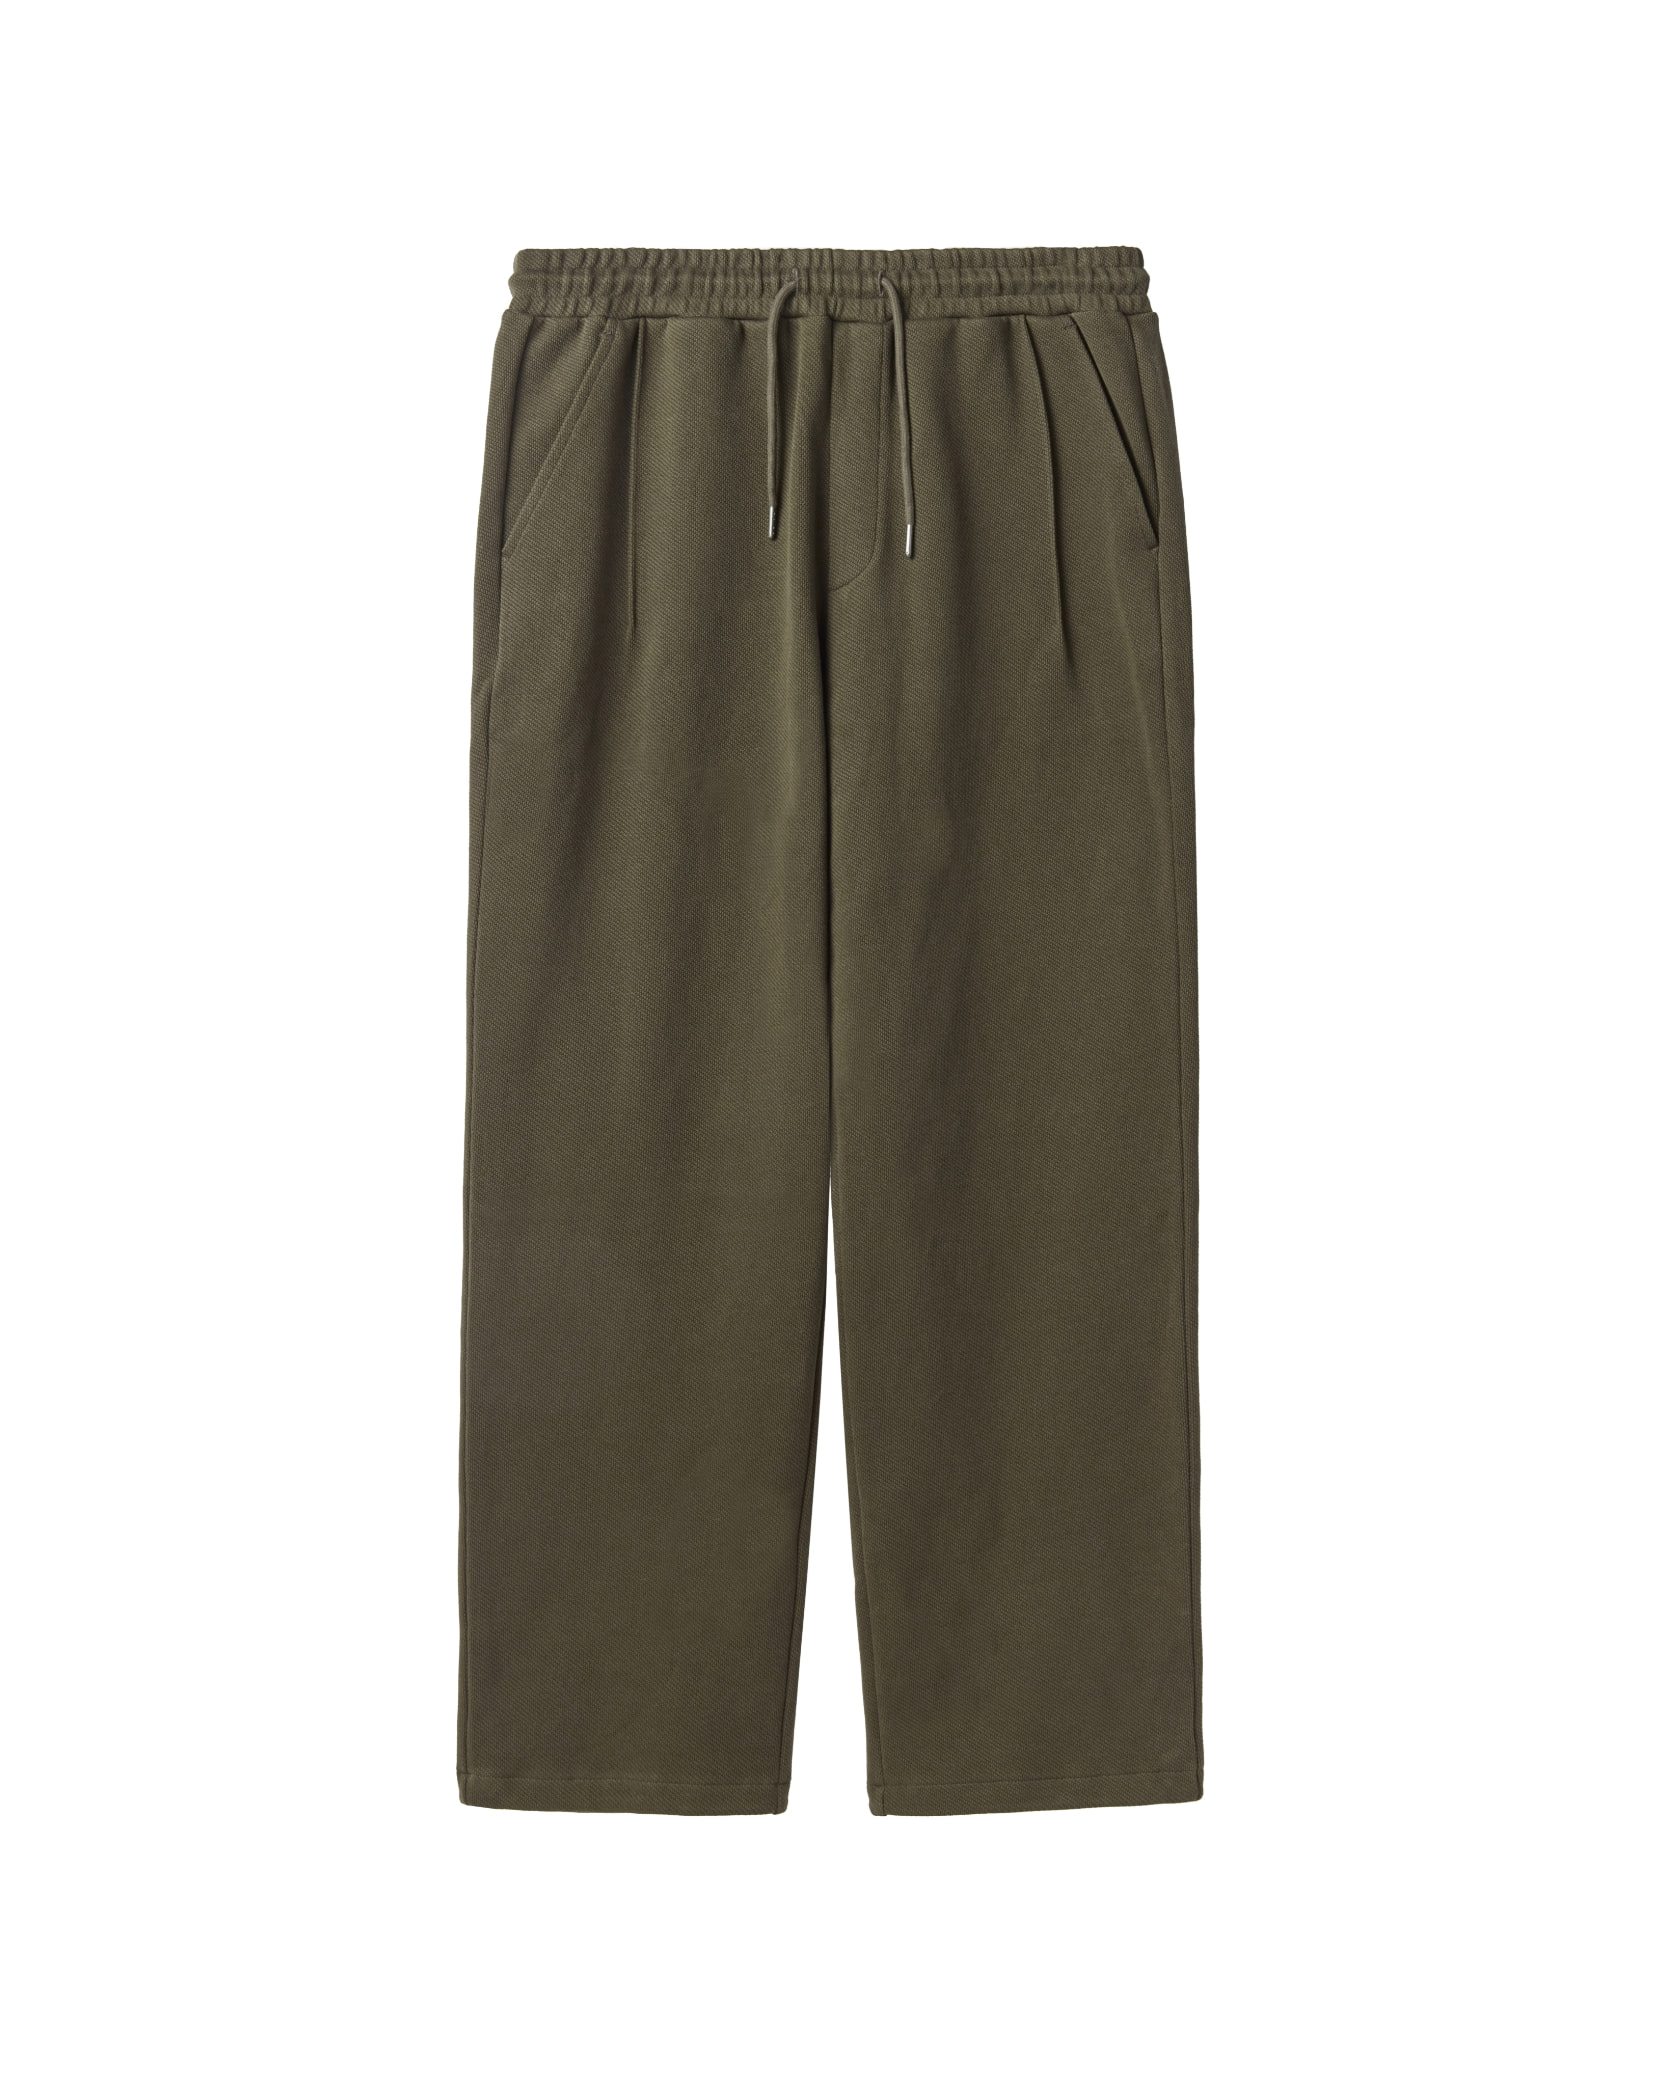 JACQUARD JERSEY TROUSERS - BROWN